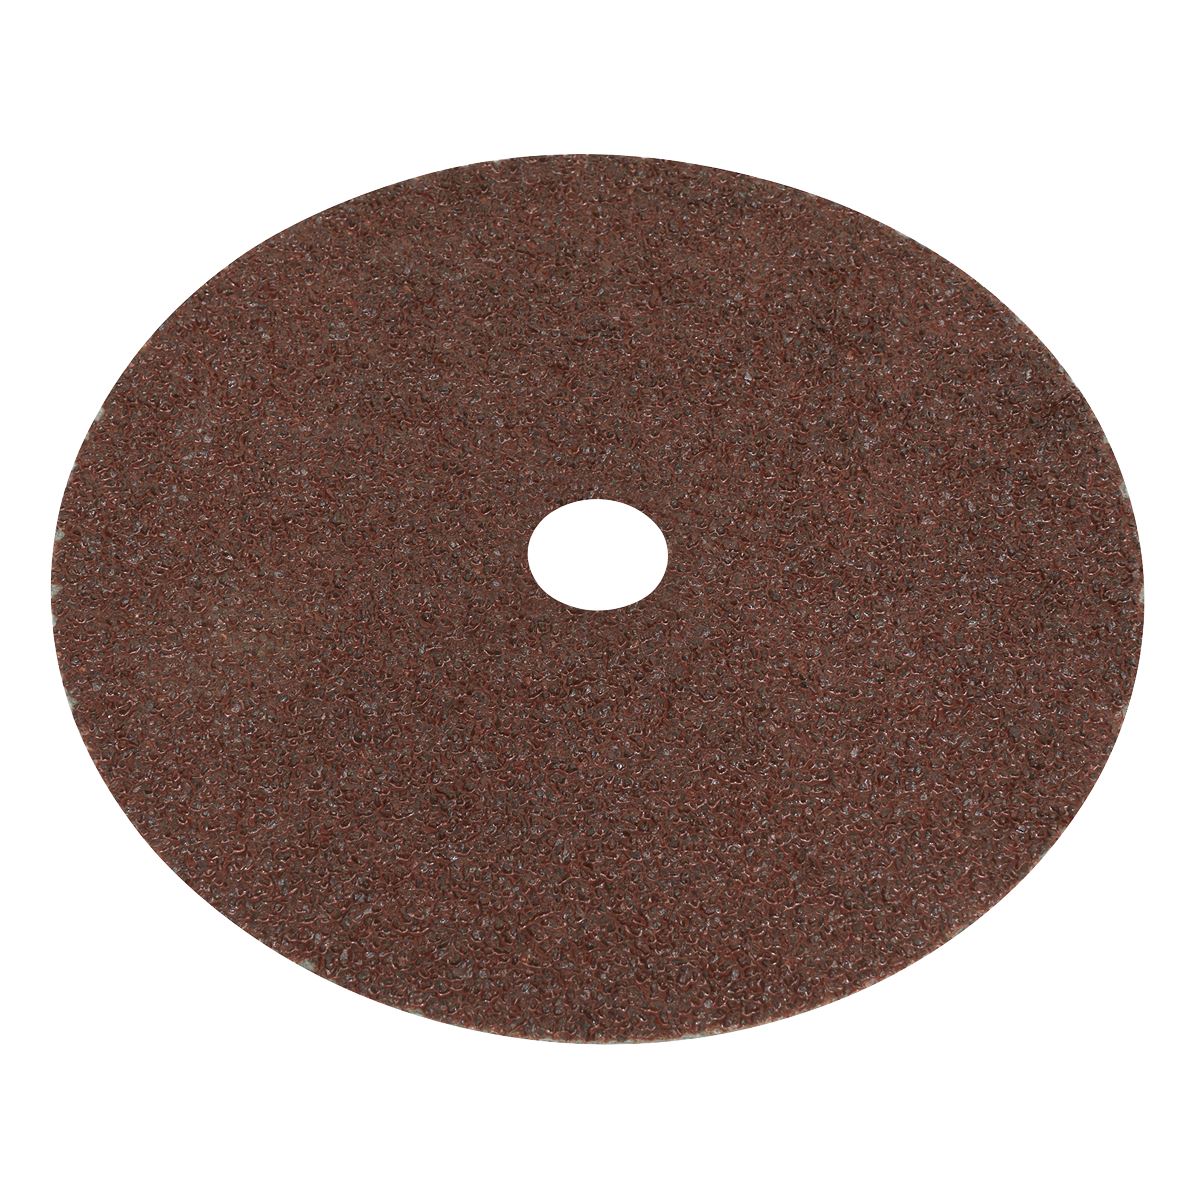 Worksafe by Sealey Fibre Backed Disc Ø175mm - 24Grit Pack of 25